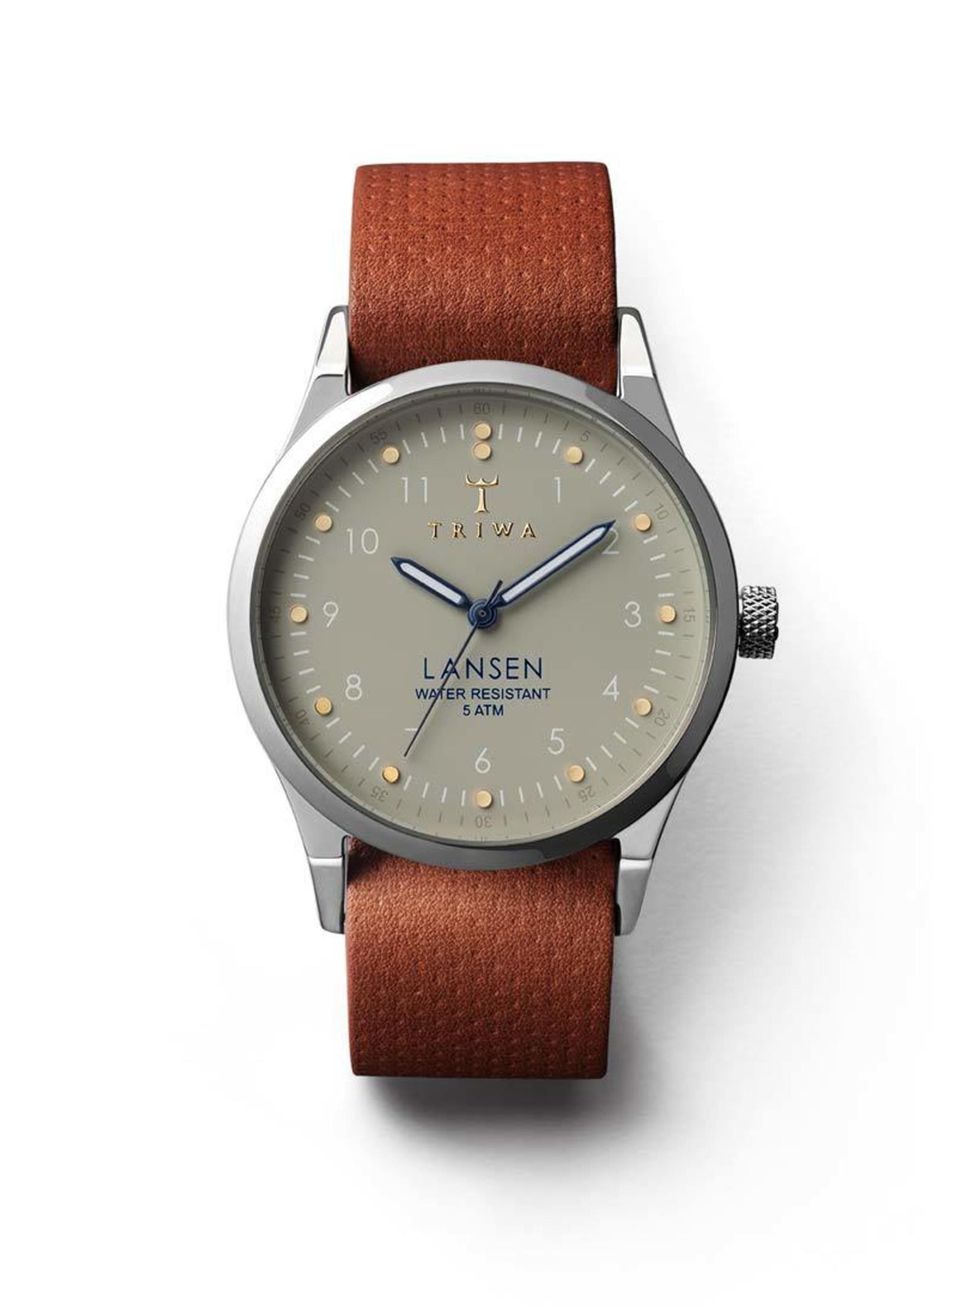 <p>This understated watch is on Associate Health &amp; Beauty Editor Amy Lawrenson&#39;s shopping list.</p>

<p>&nbsp;</p>

<p><a href="http://triwa.com/en/watches/aw14/dawn-lansen" target="_blank">Triwa</a> watch, &pound;149</p>